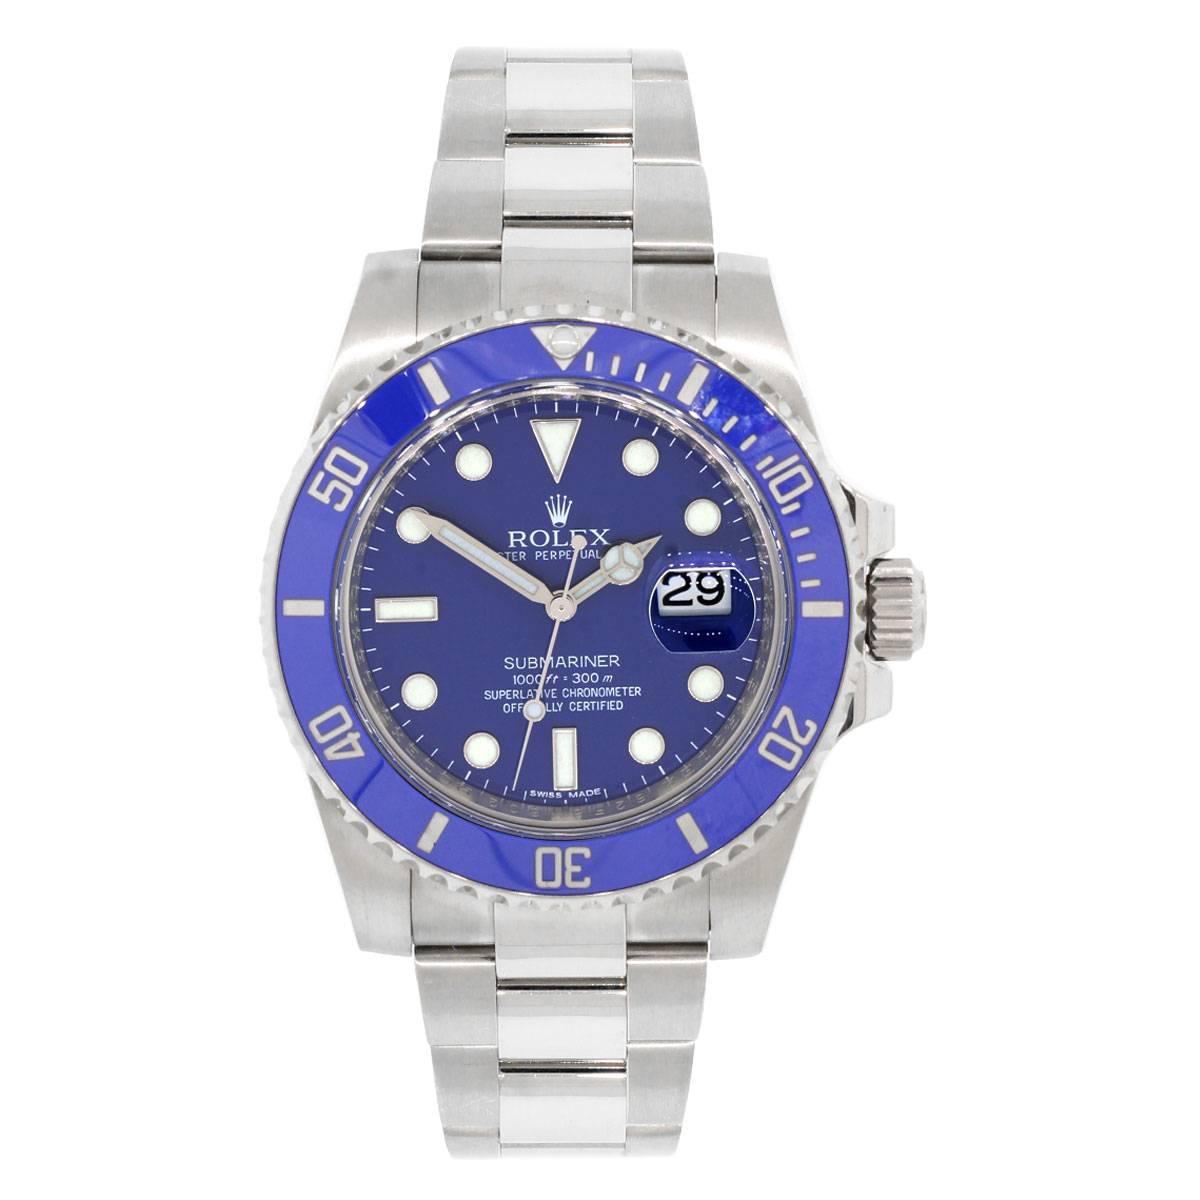 Brand: Rolex
MPN: 116619LB
Model: Submariner
Case Material: 18k white gold
Case Diameter: 40mm
Crystal: Scratch resistant sapphire
Bezel: Ceramic blue bezel (factory)
Dial: Blue dial (factory)
Bracelet: 18k white gold oyster band
Size: Will fit a